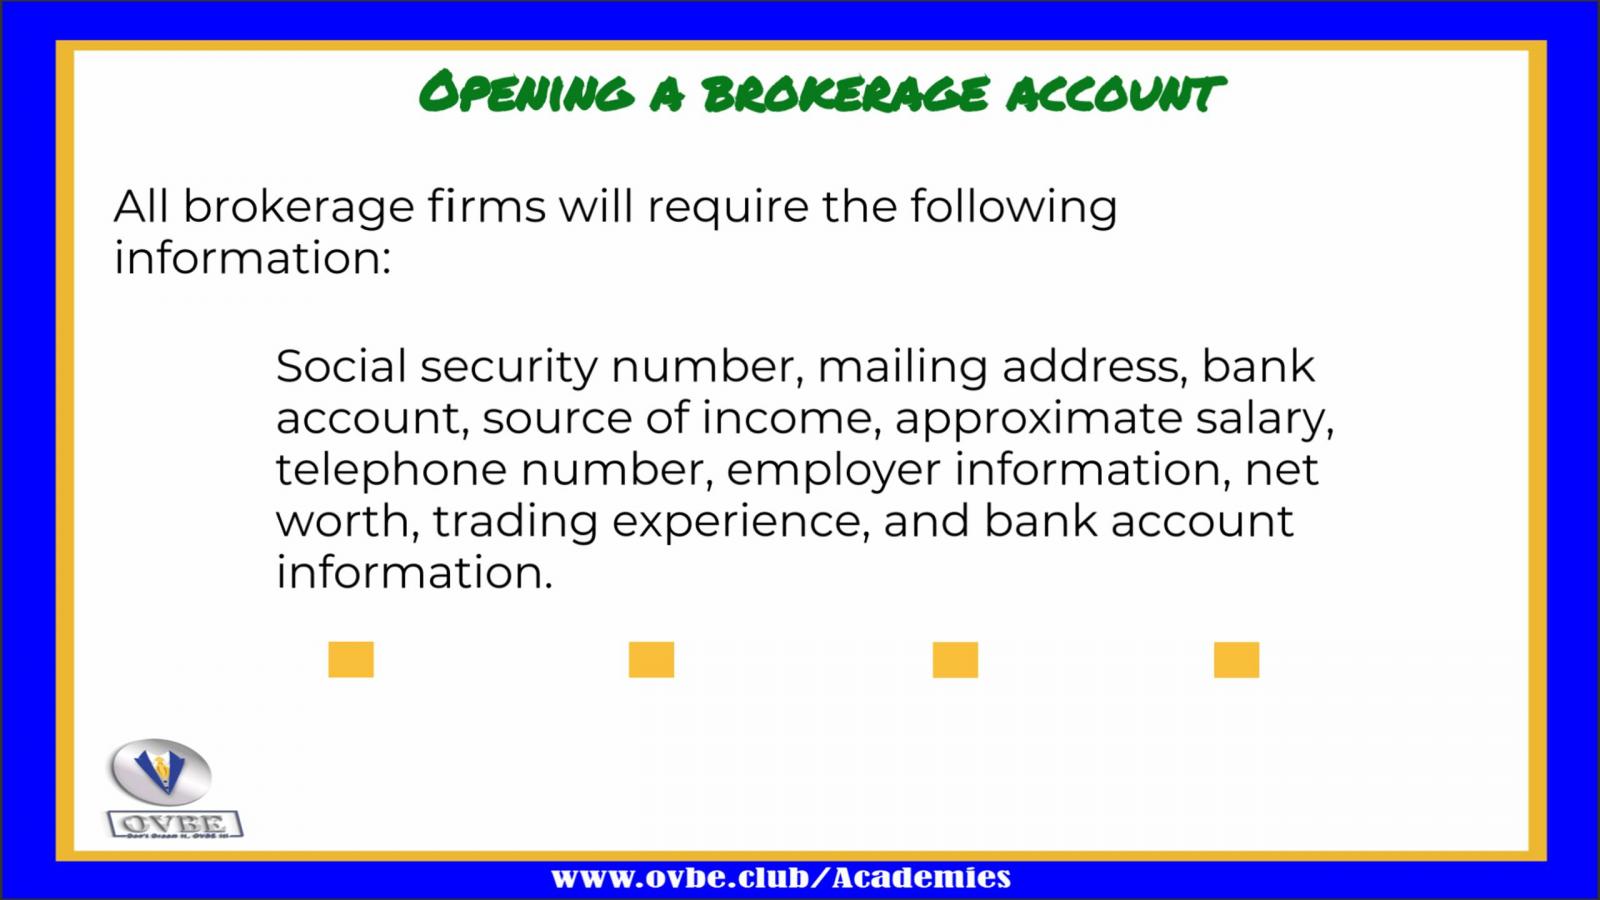 Opening A Brokerage Account pg. 4